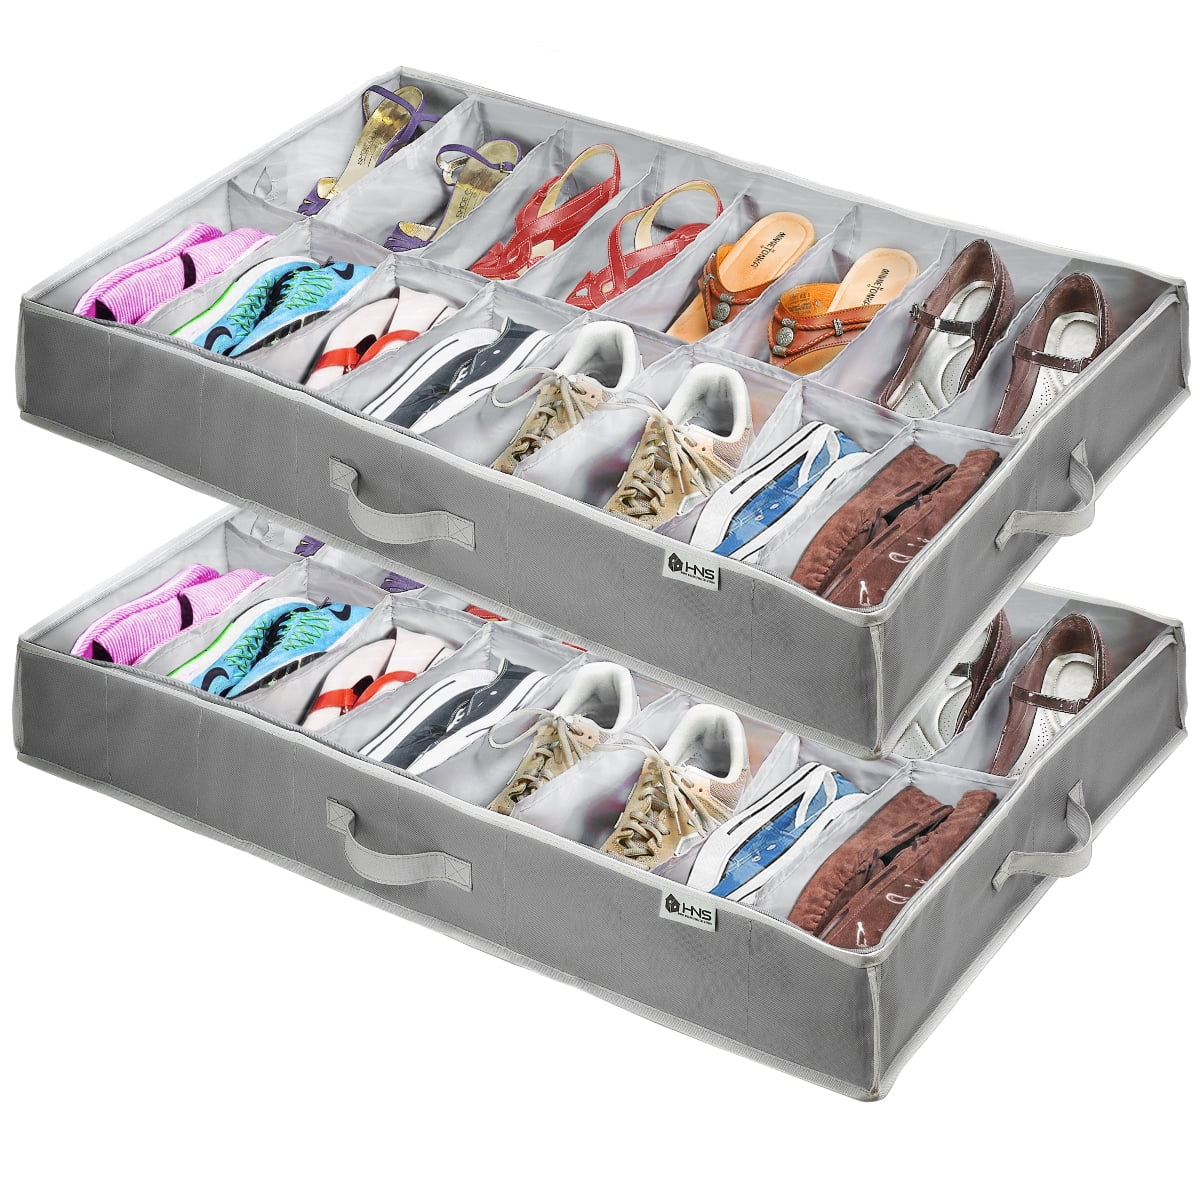 Under Bed Shoe Storage Organizer for Closet Fits 24 Pairs-Sturdy Underbed Shoe Containers Box Bedding Storage Organizador de Zapatos with Clear Cover